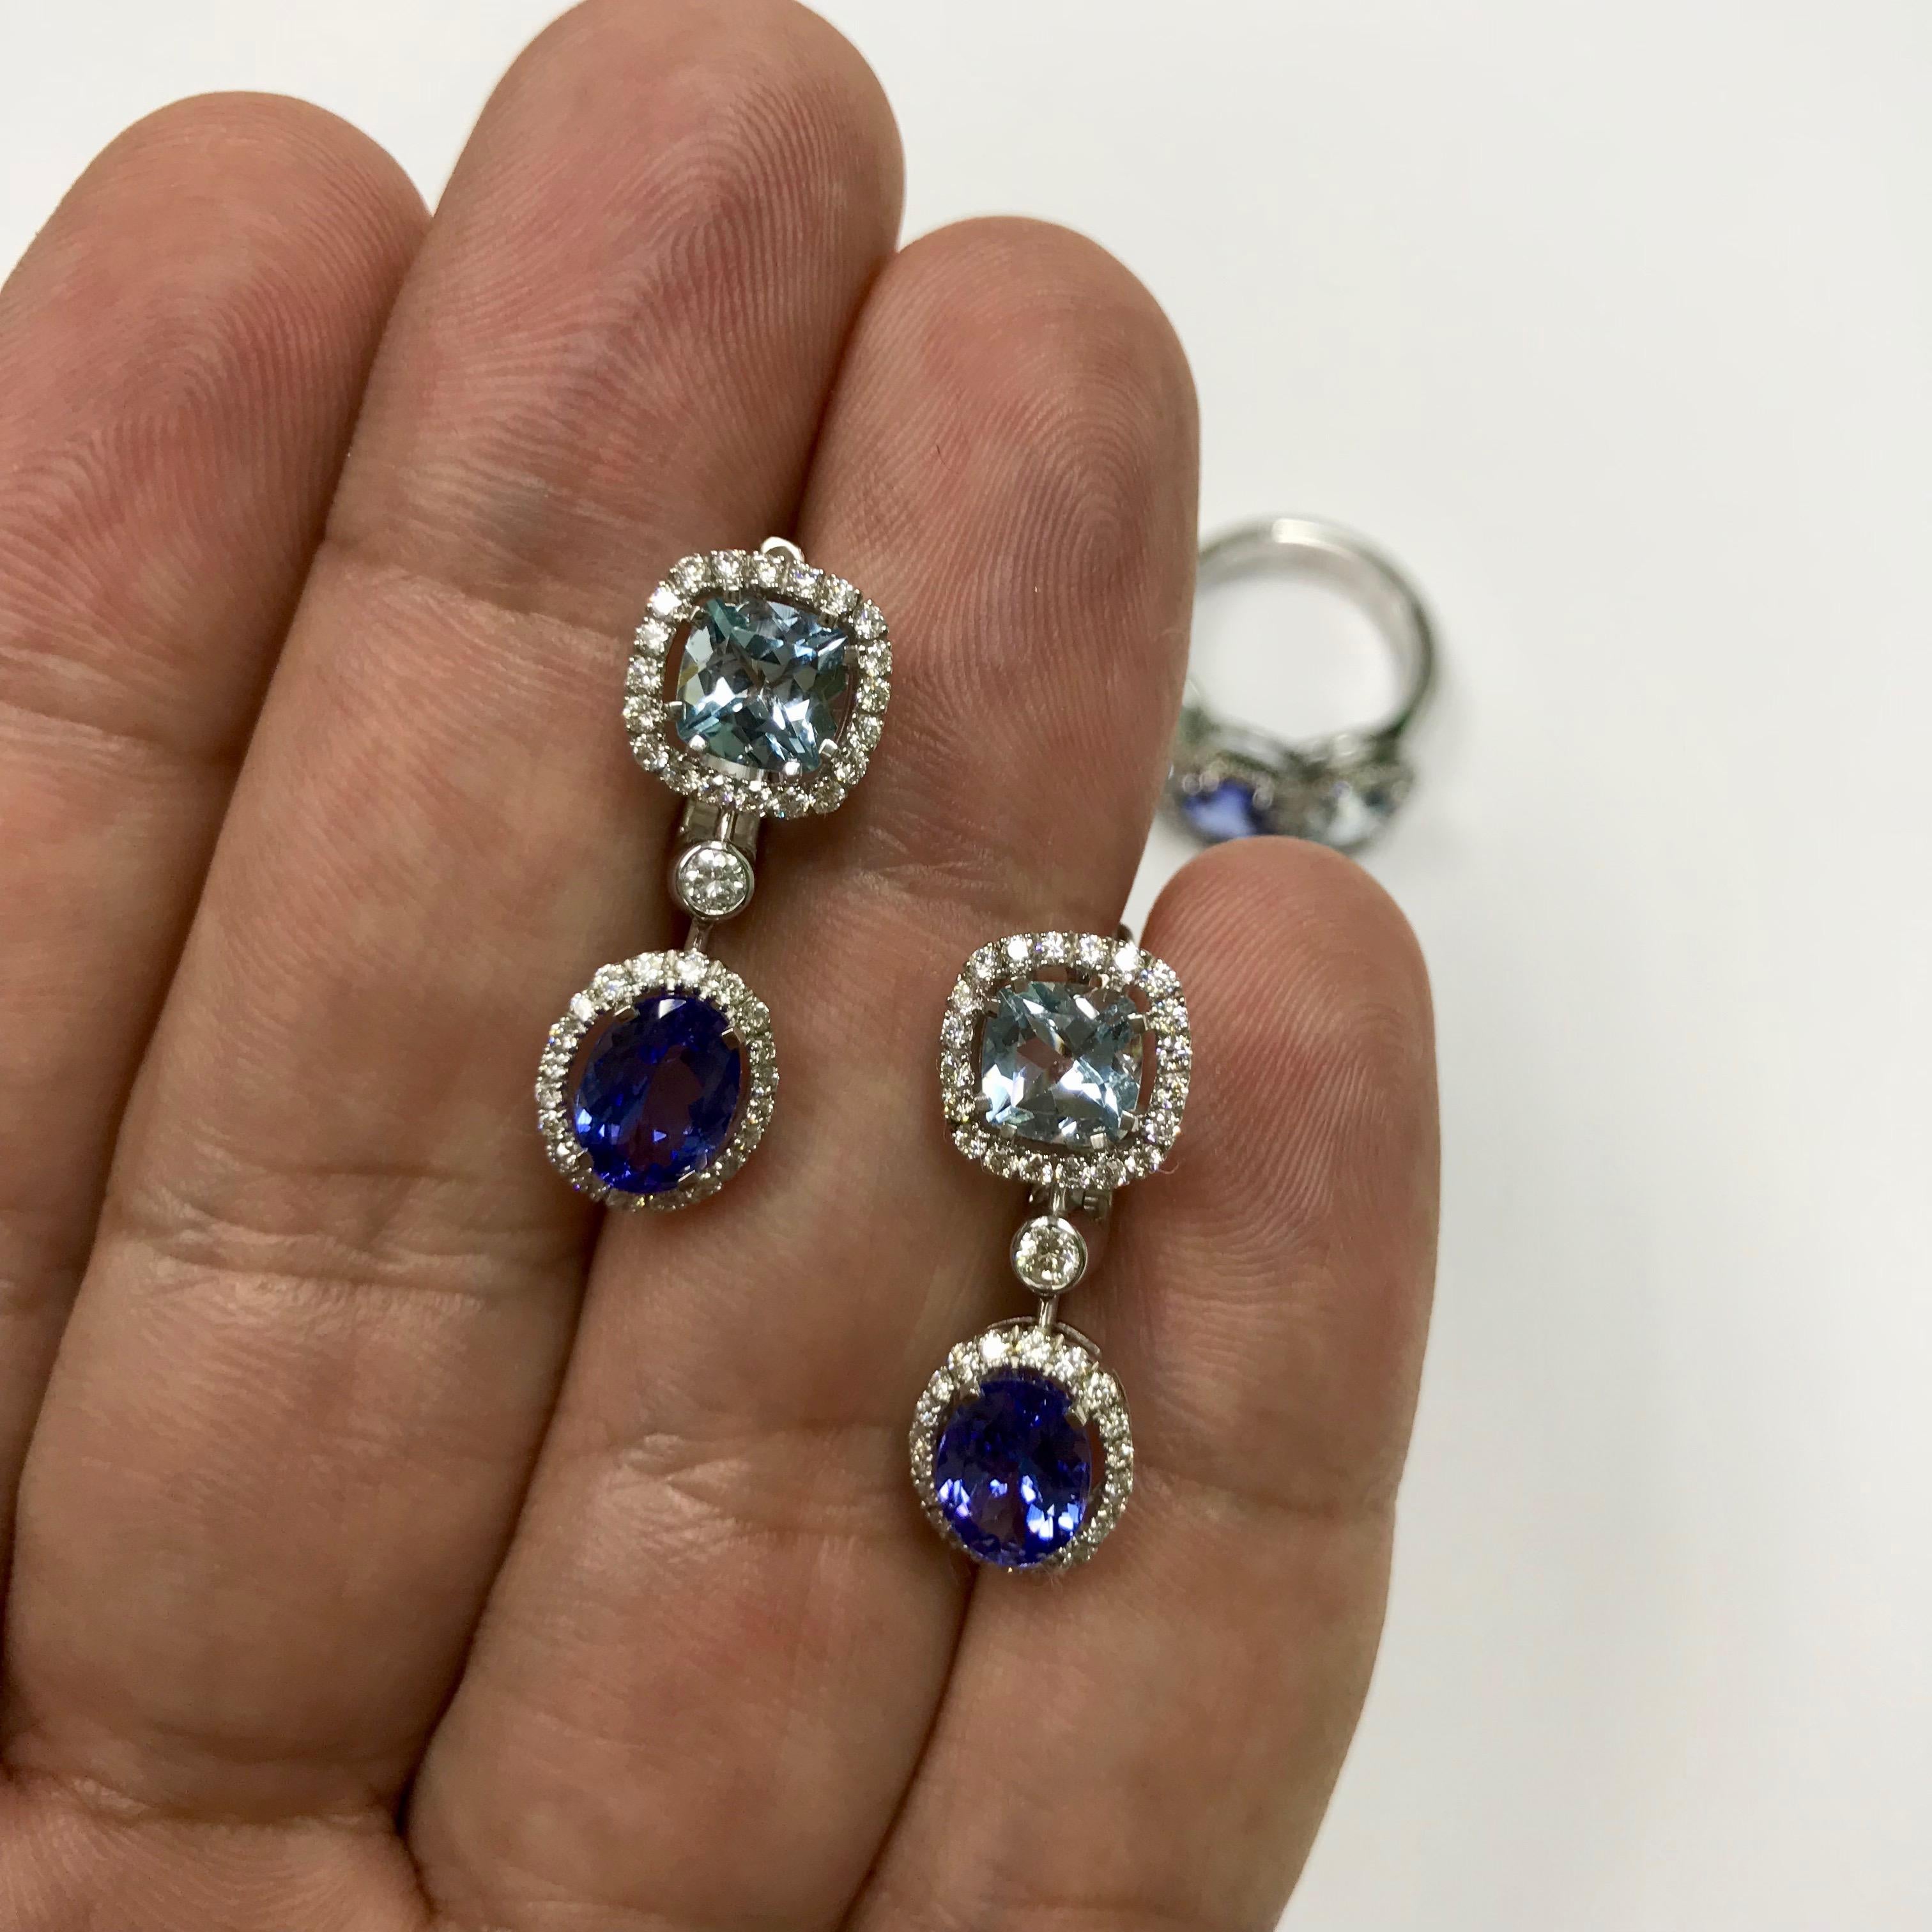 Classic Tanzanite, Aquamarine and Diamond 18 Karat White Gold Earrings

Available in set with ring LU116414714291
